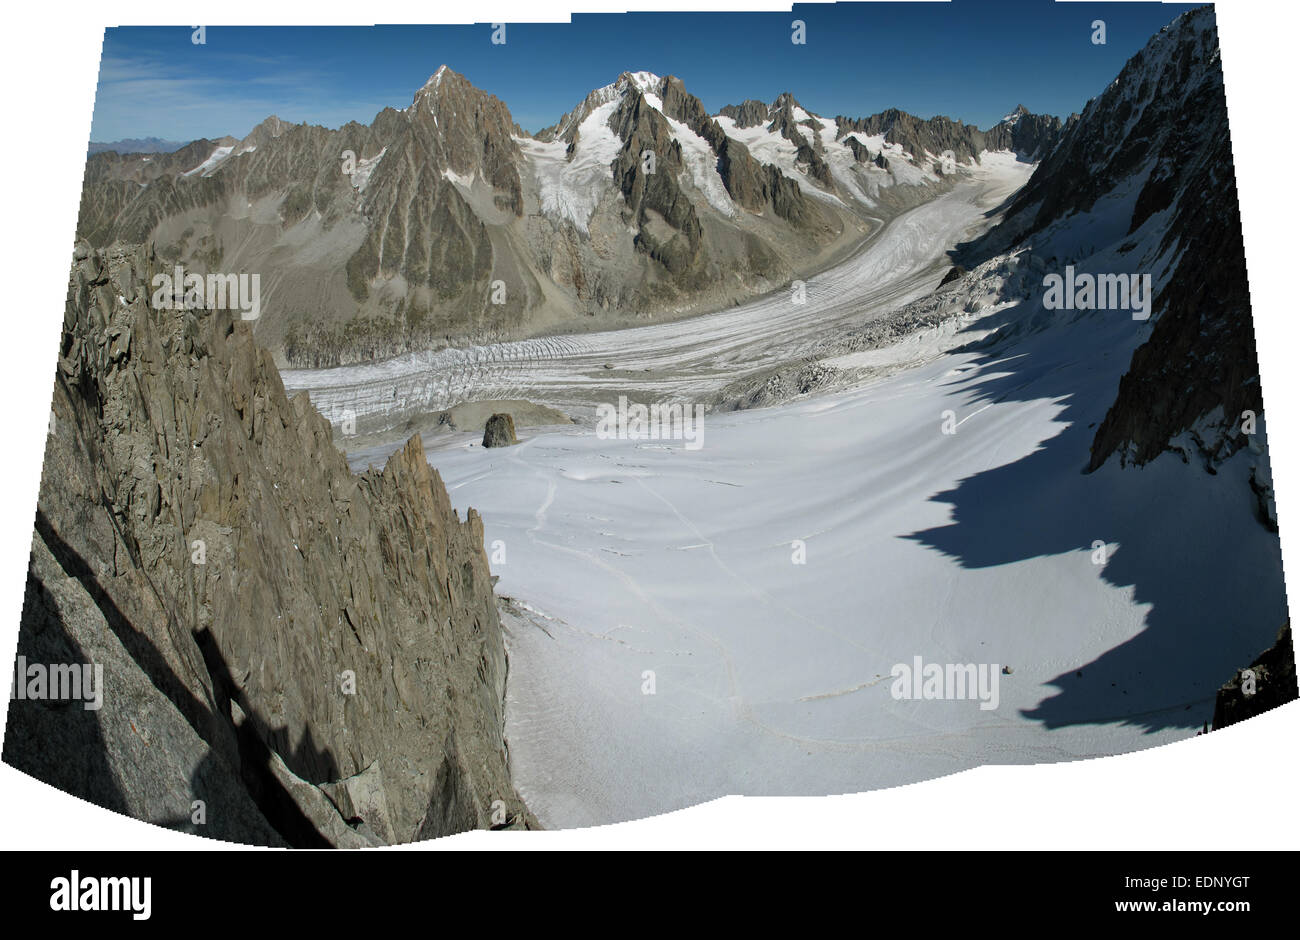 Uncropped panorama of the Argentiere Glacier from the Grands Montets, Chamonix in the French Alps, France Stock Photo